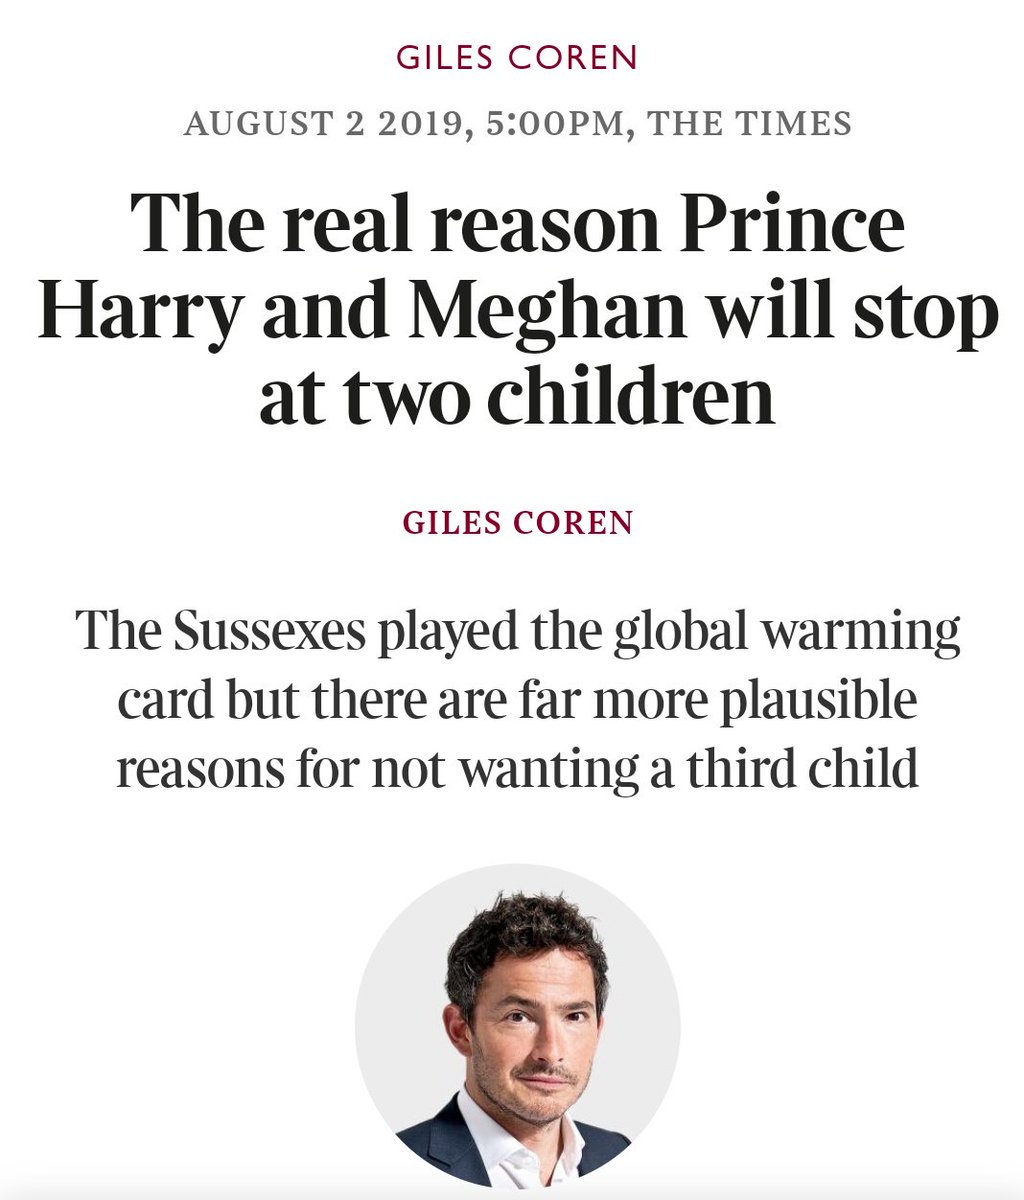 Exhibit 33:  #PrimatologistGateGiles Coren jokes that Meghan didn't see a medical doctor about family planning, but rather the noted primatologist Jane Goodall. Yes, Harry had interviewed her. But why would a human discuss human birth control with a primatologist?